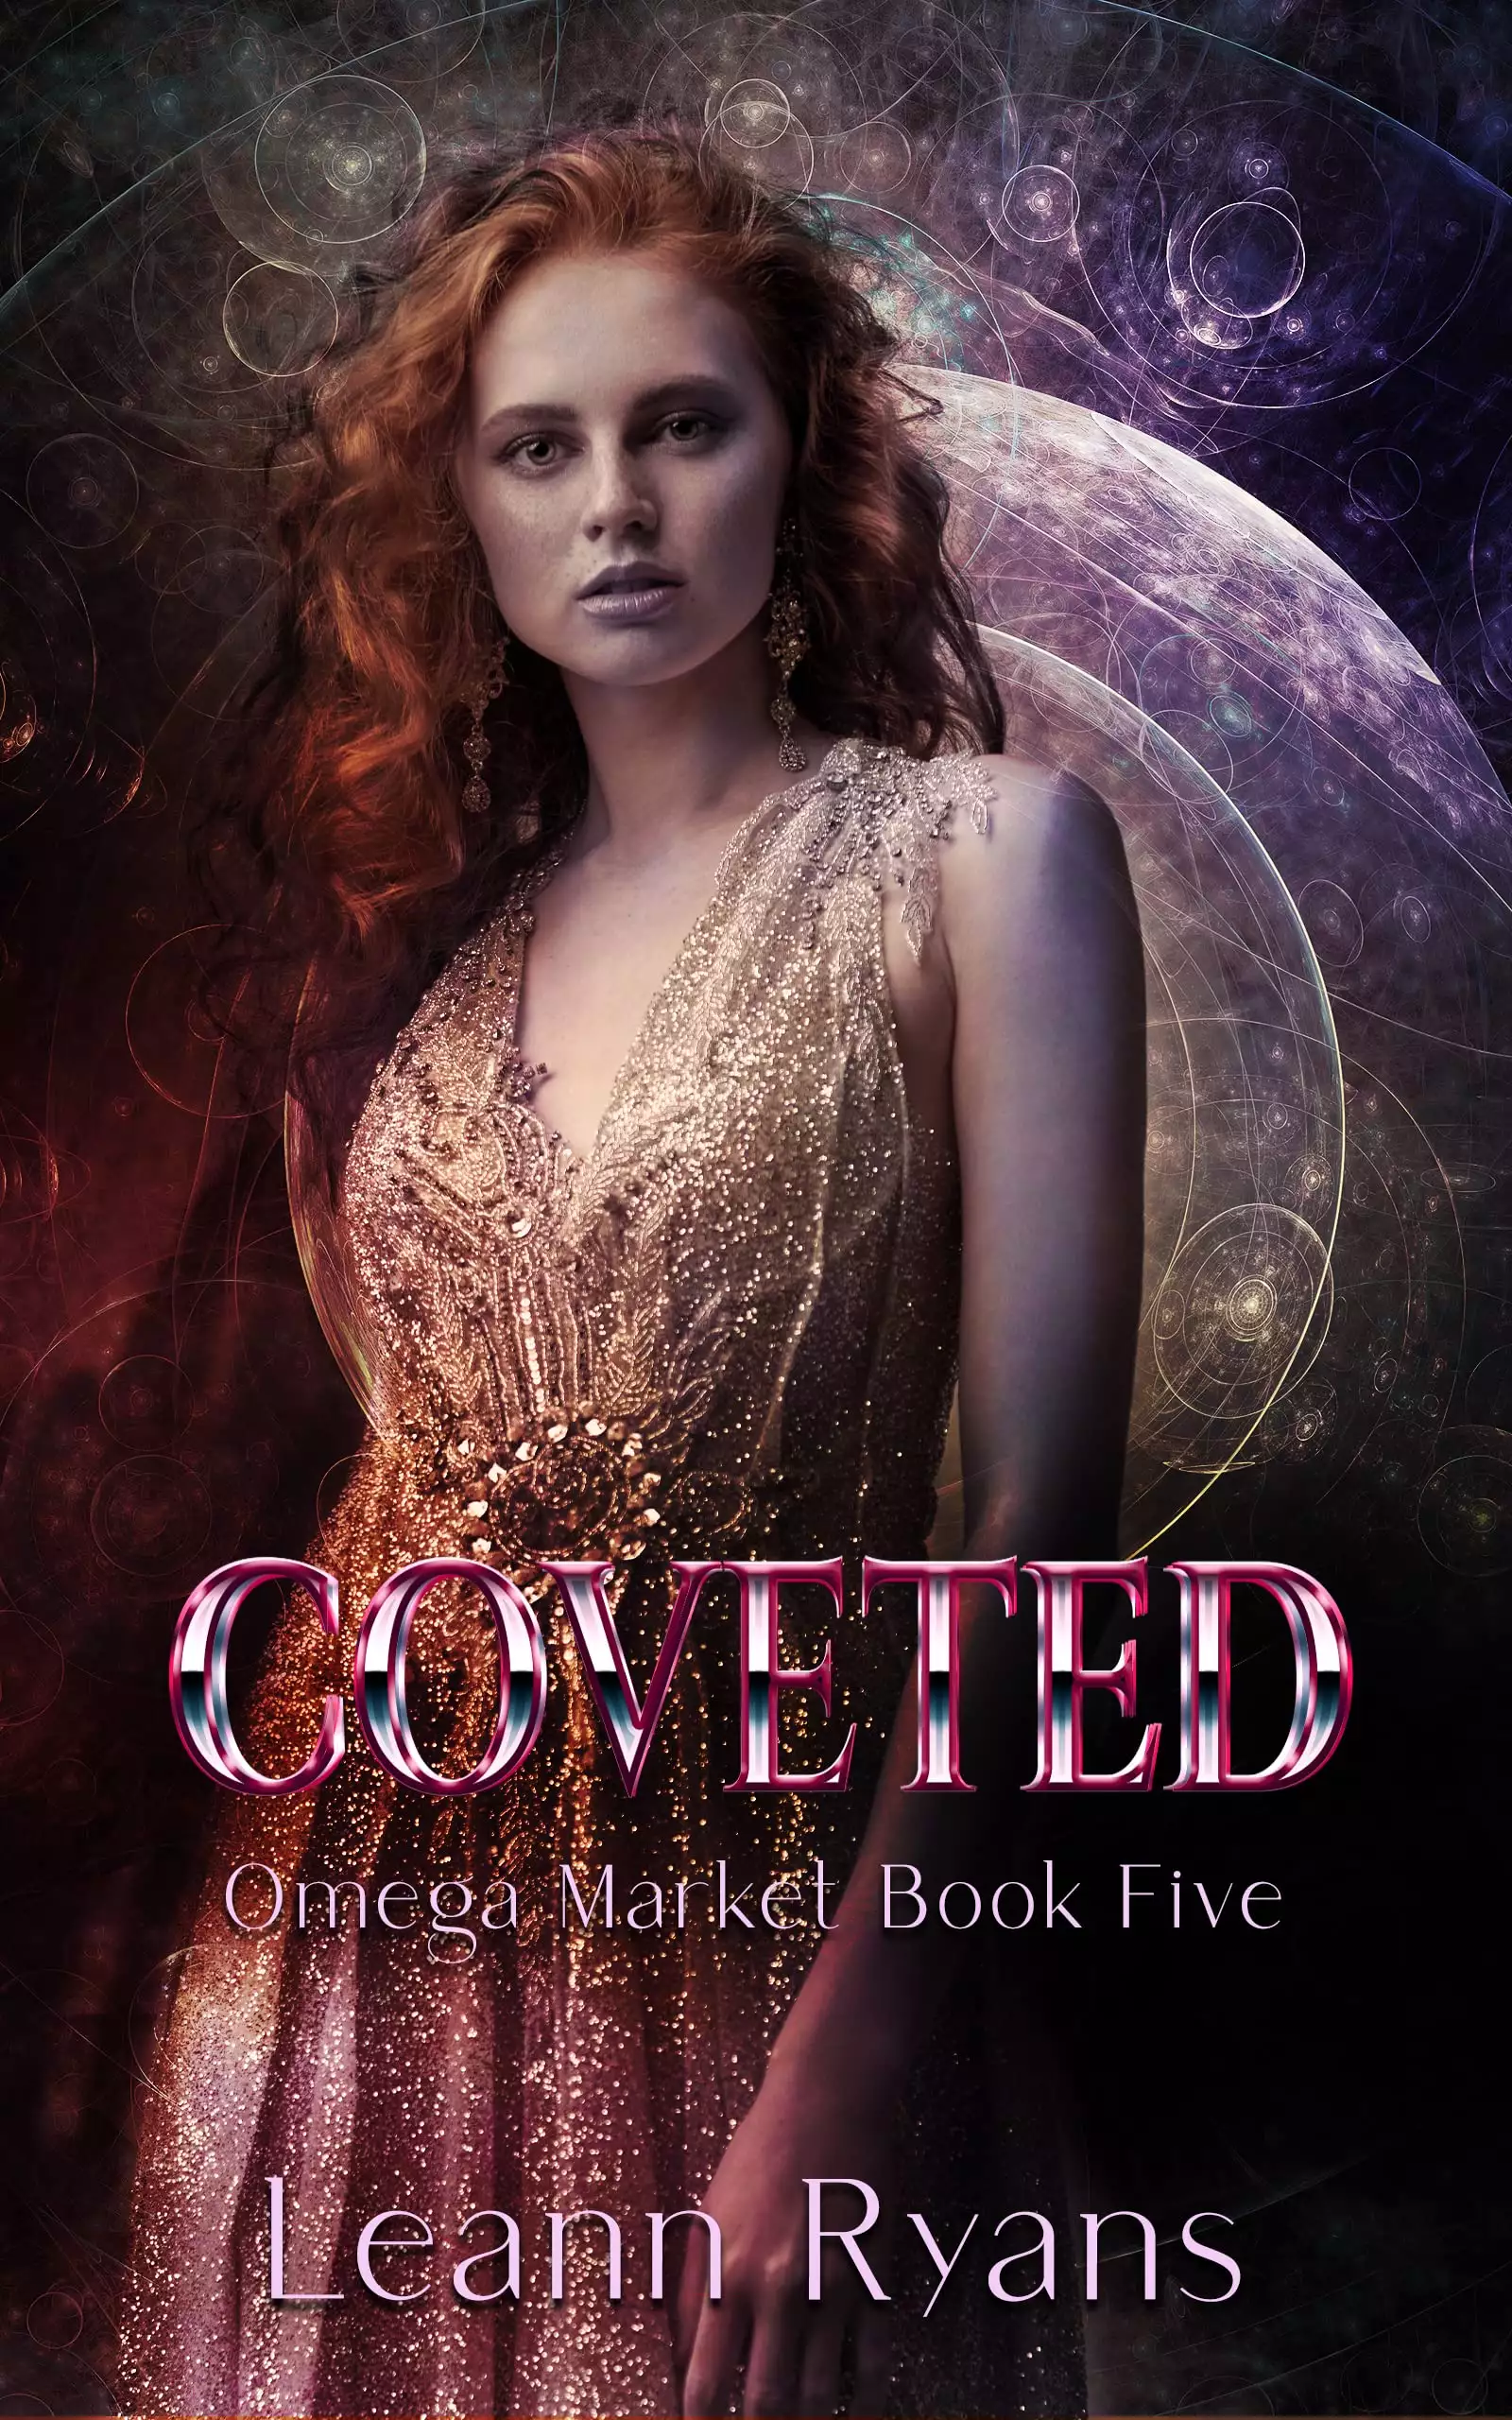 Coveted: An Alien Omegaverse Romance